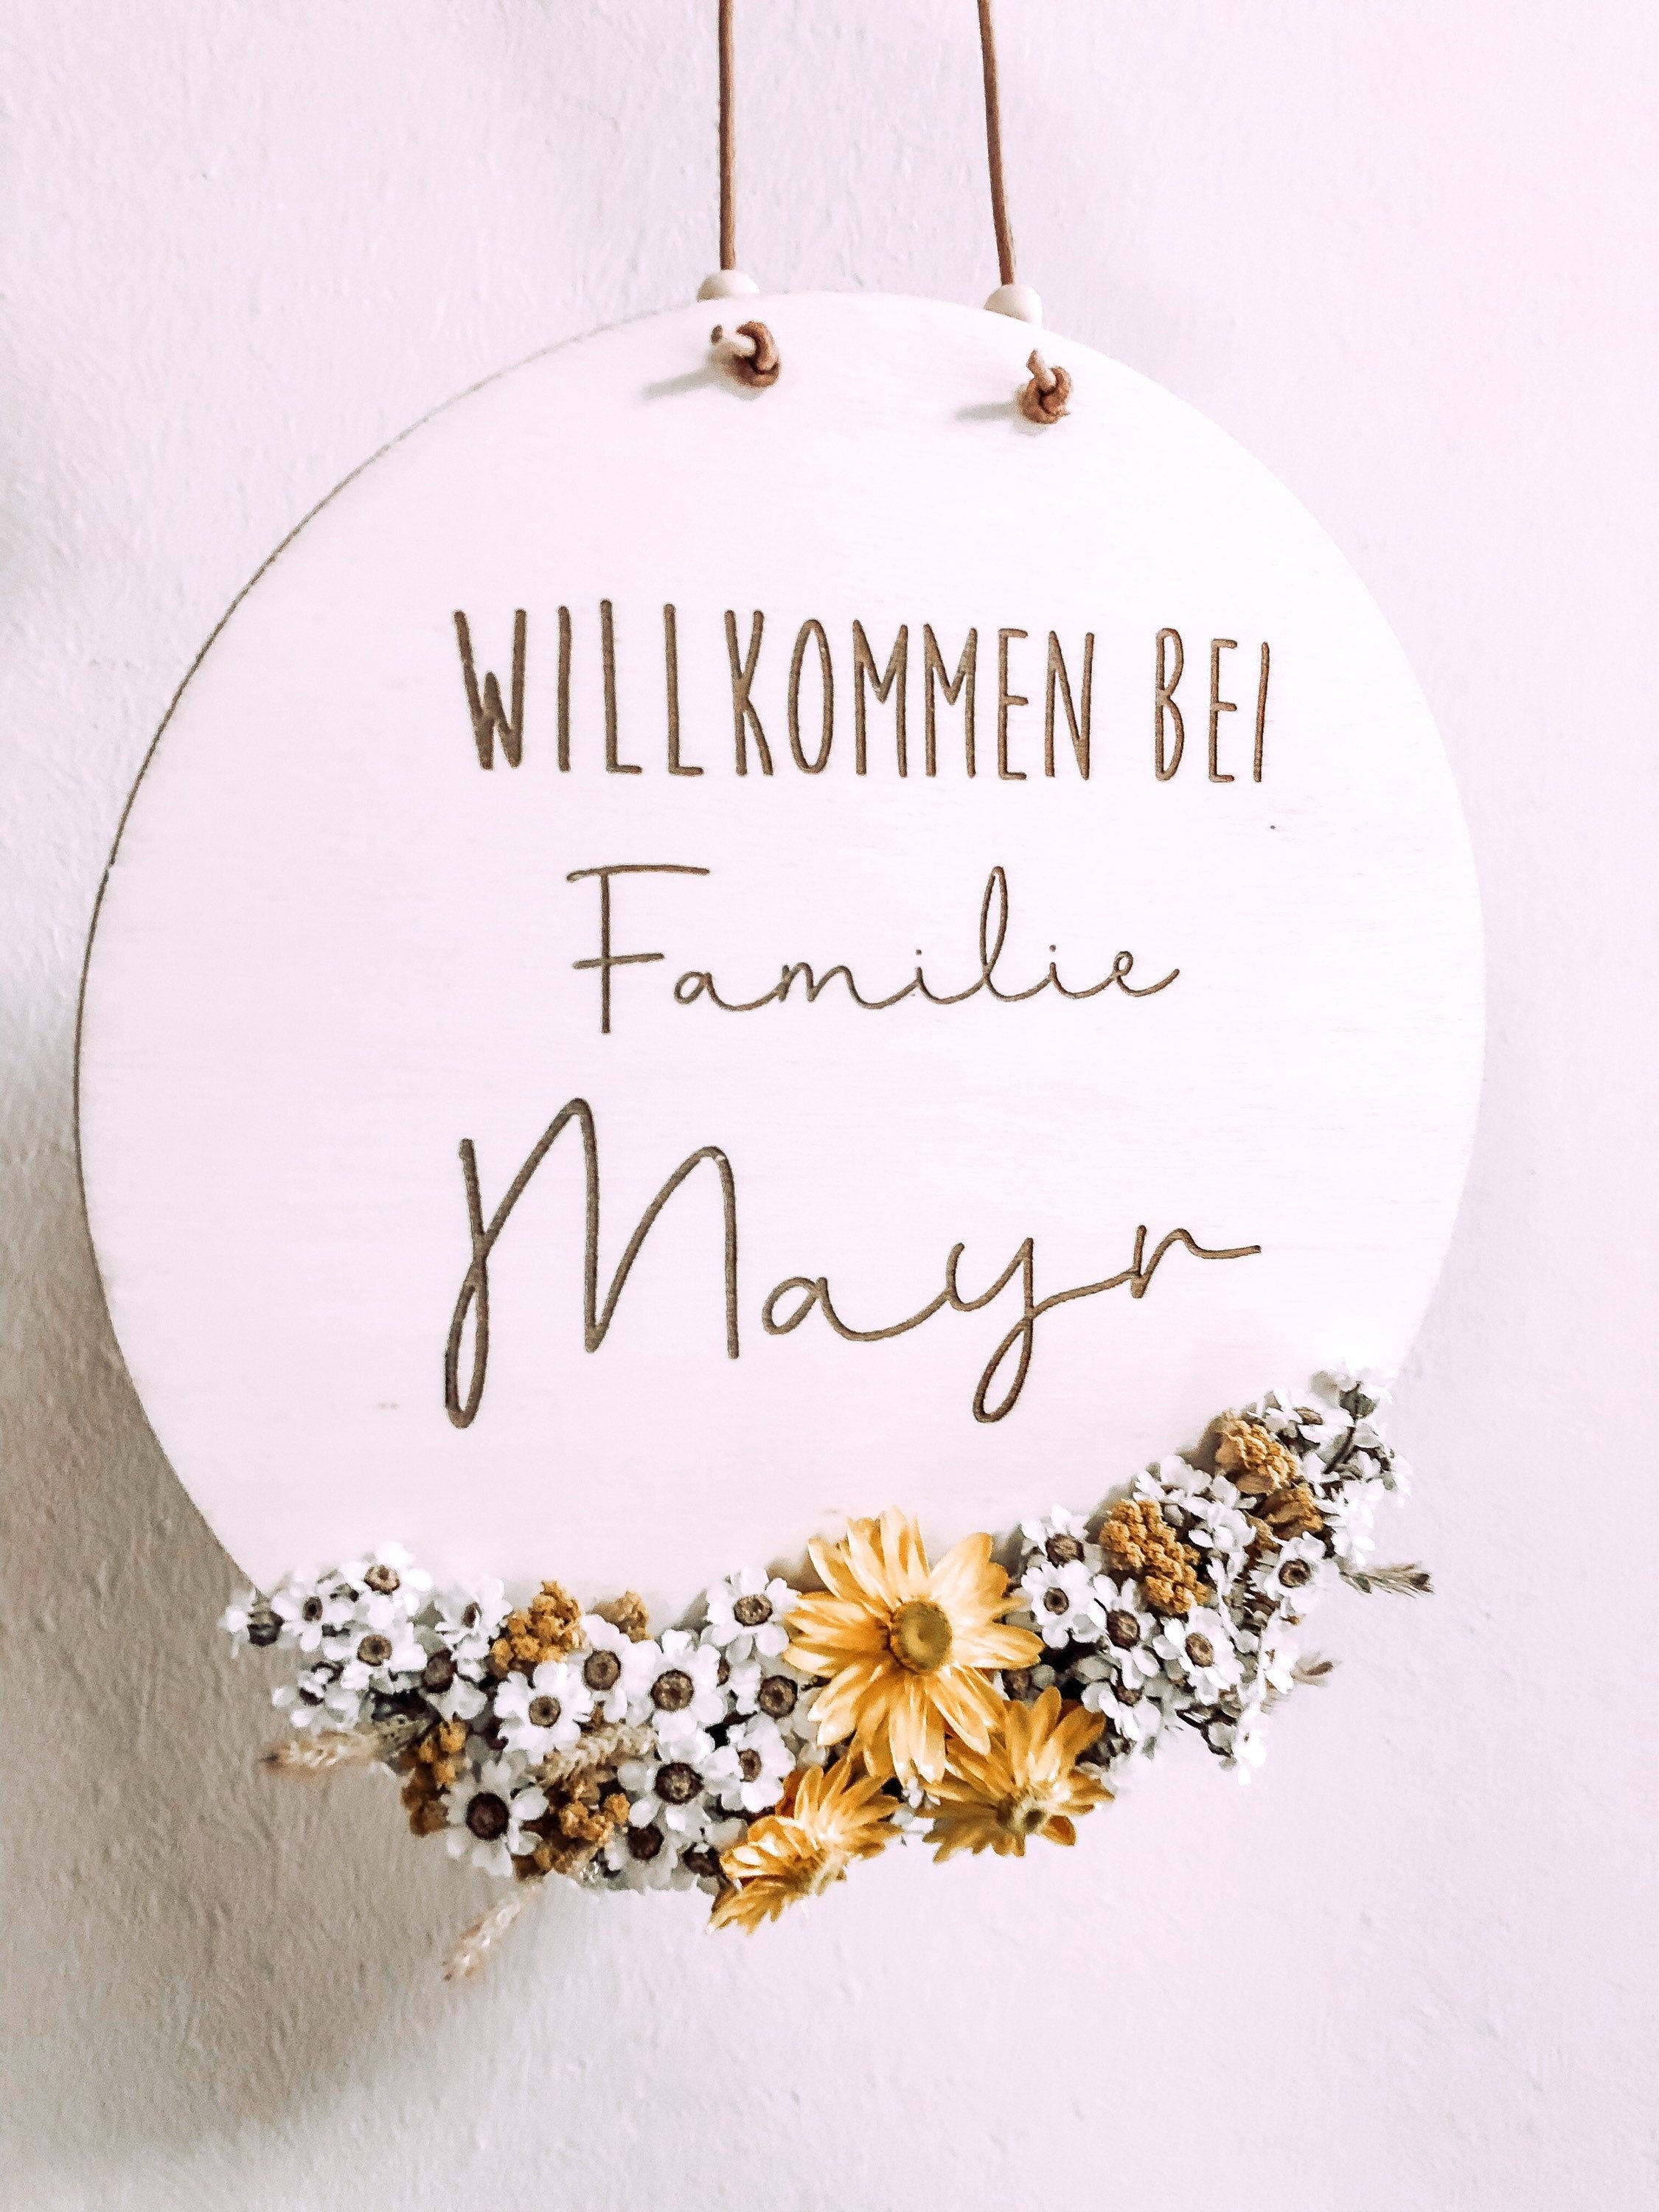 Personalized welcome sign/entrance sign with dried flowers